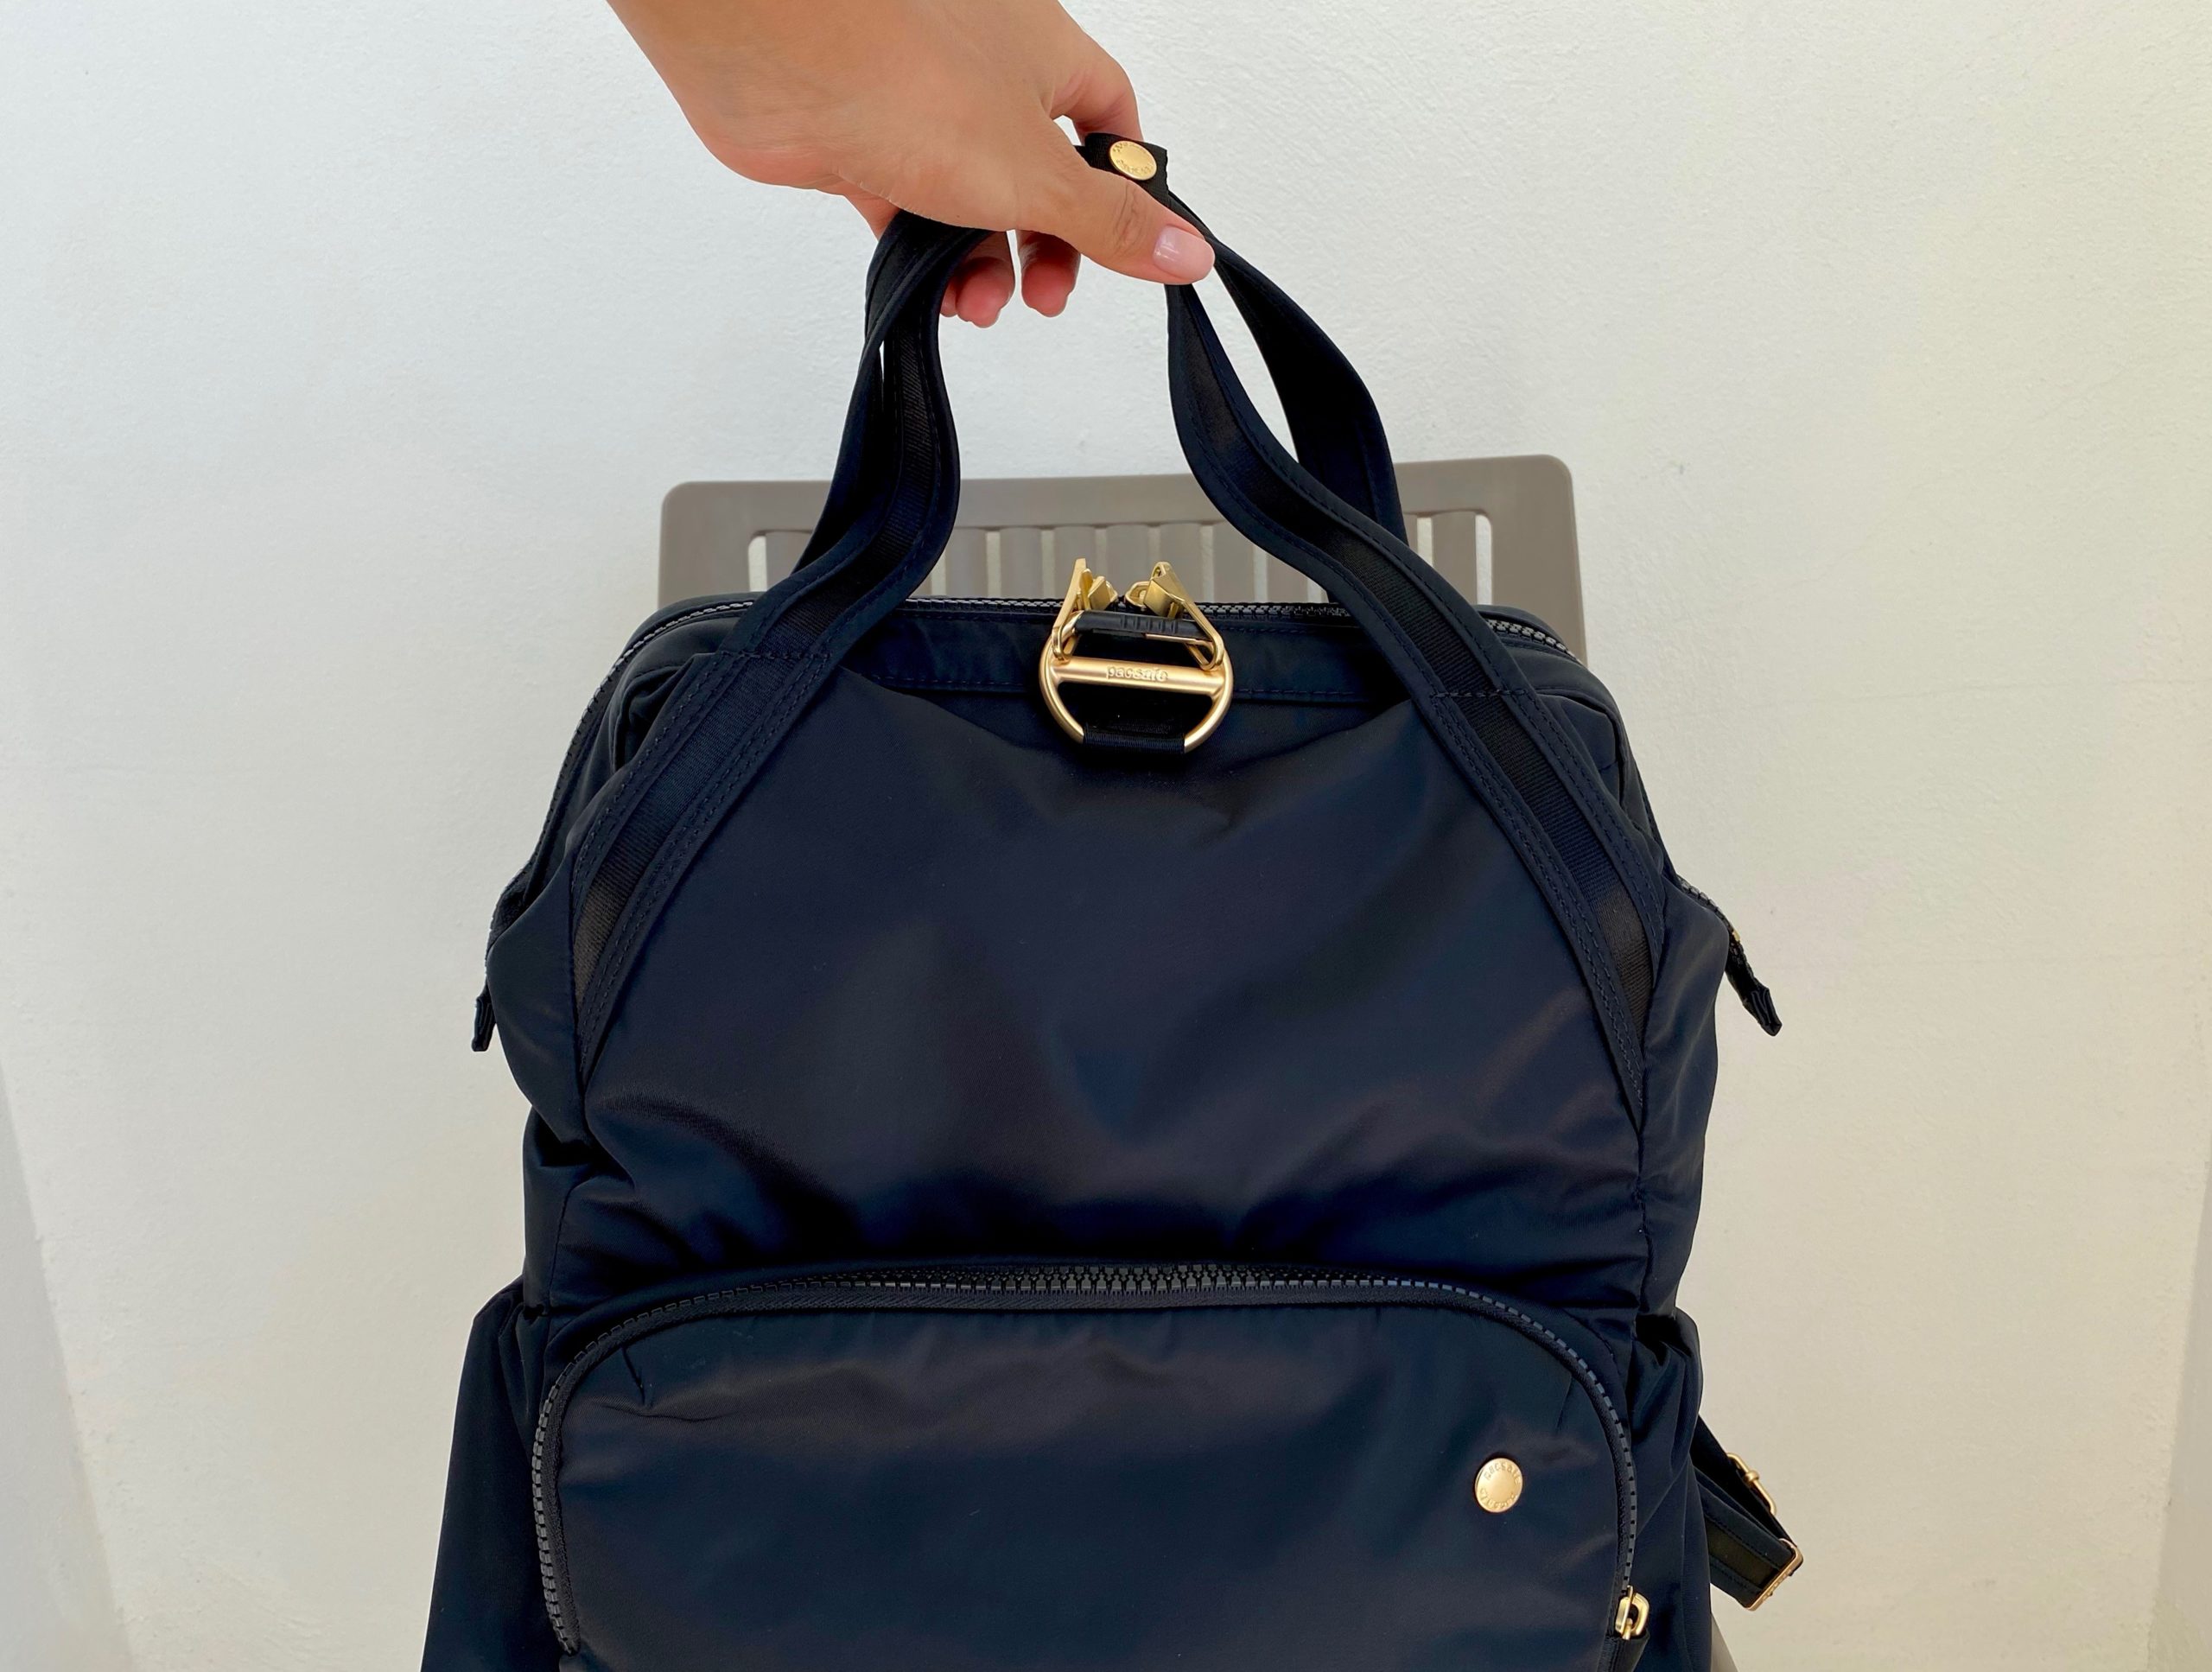 Anti Theft Backpack - justpeachy.co - the official blog of Chia